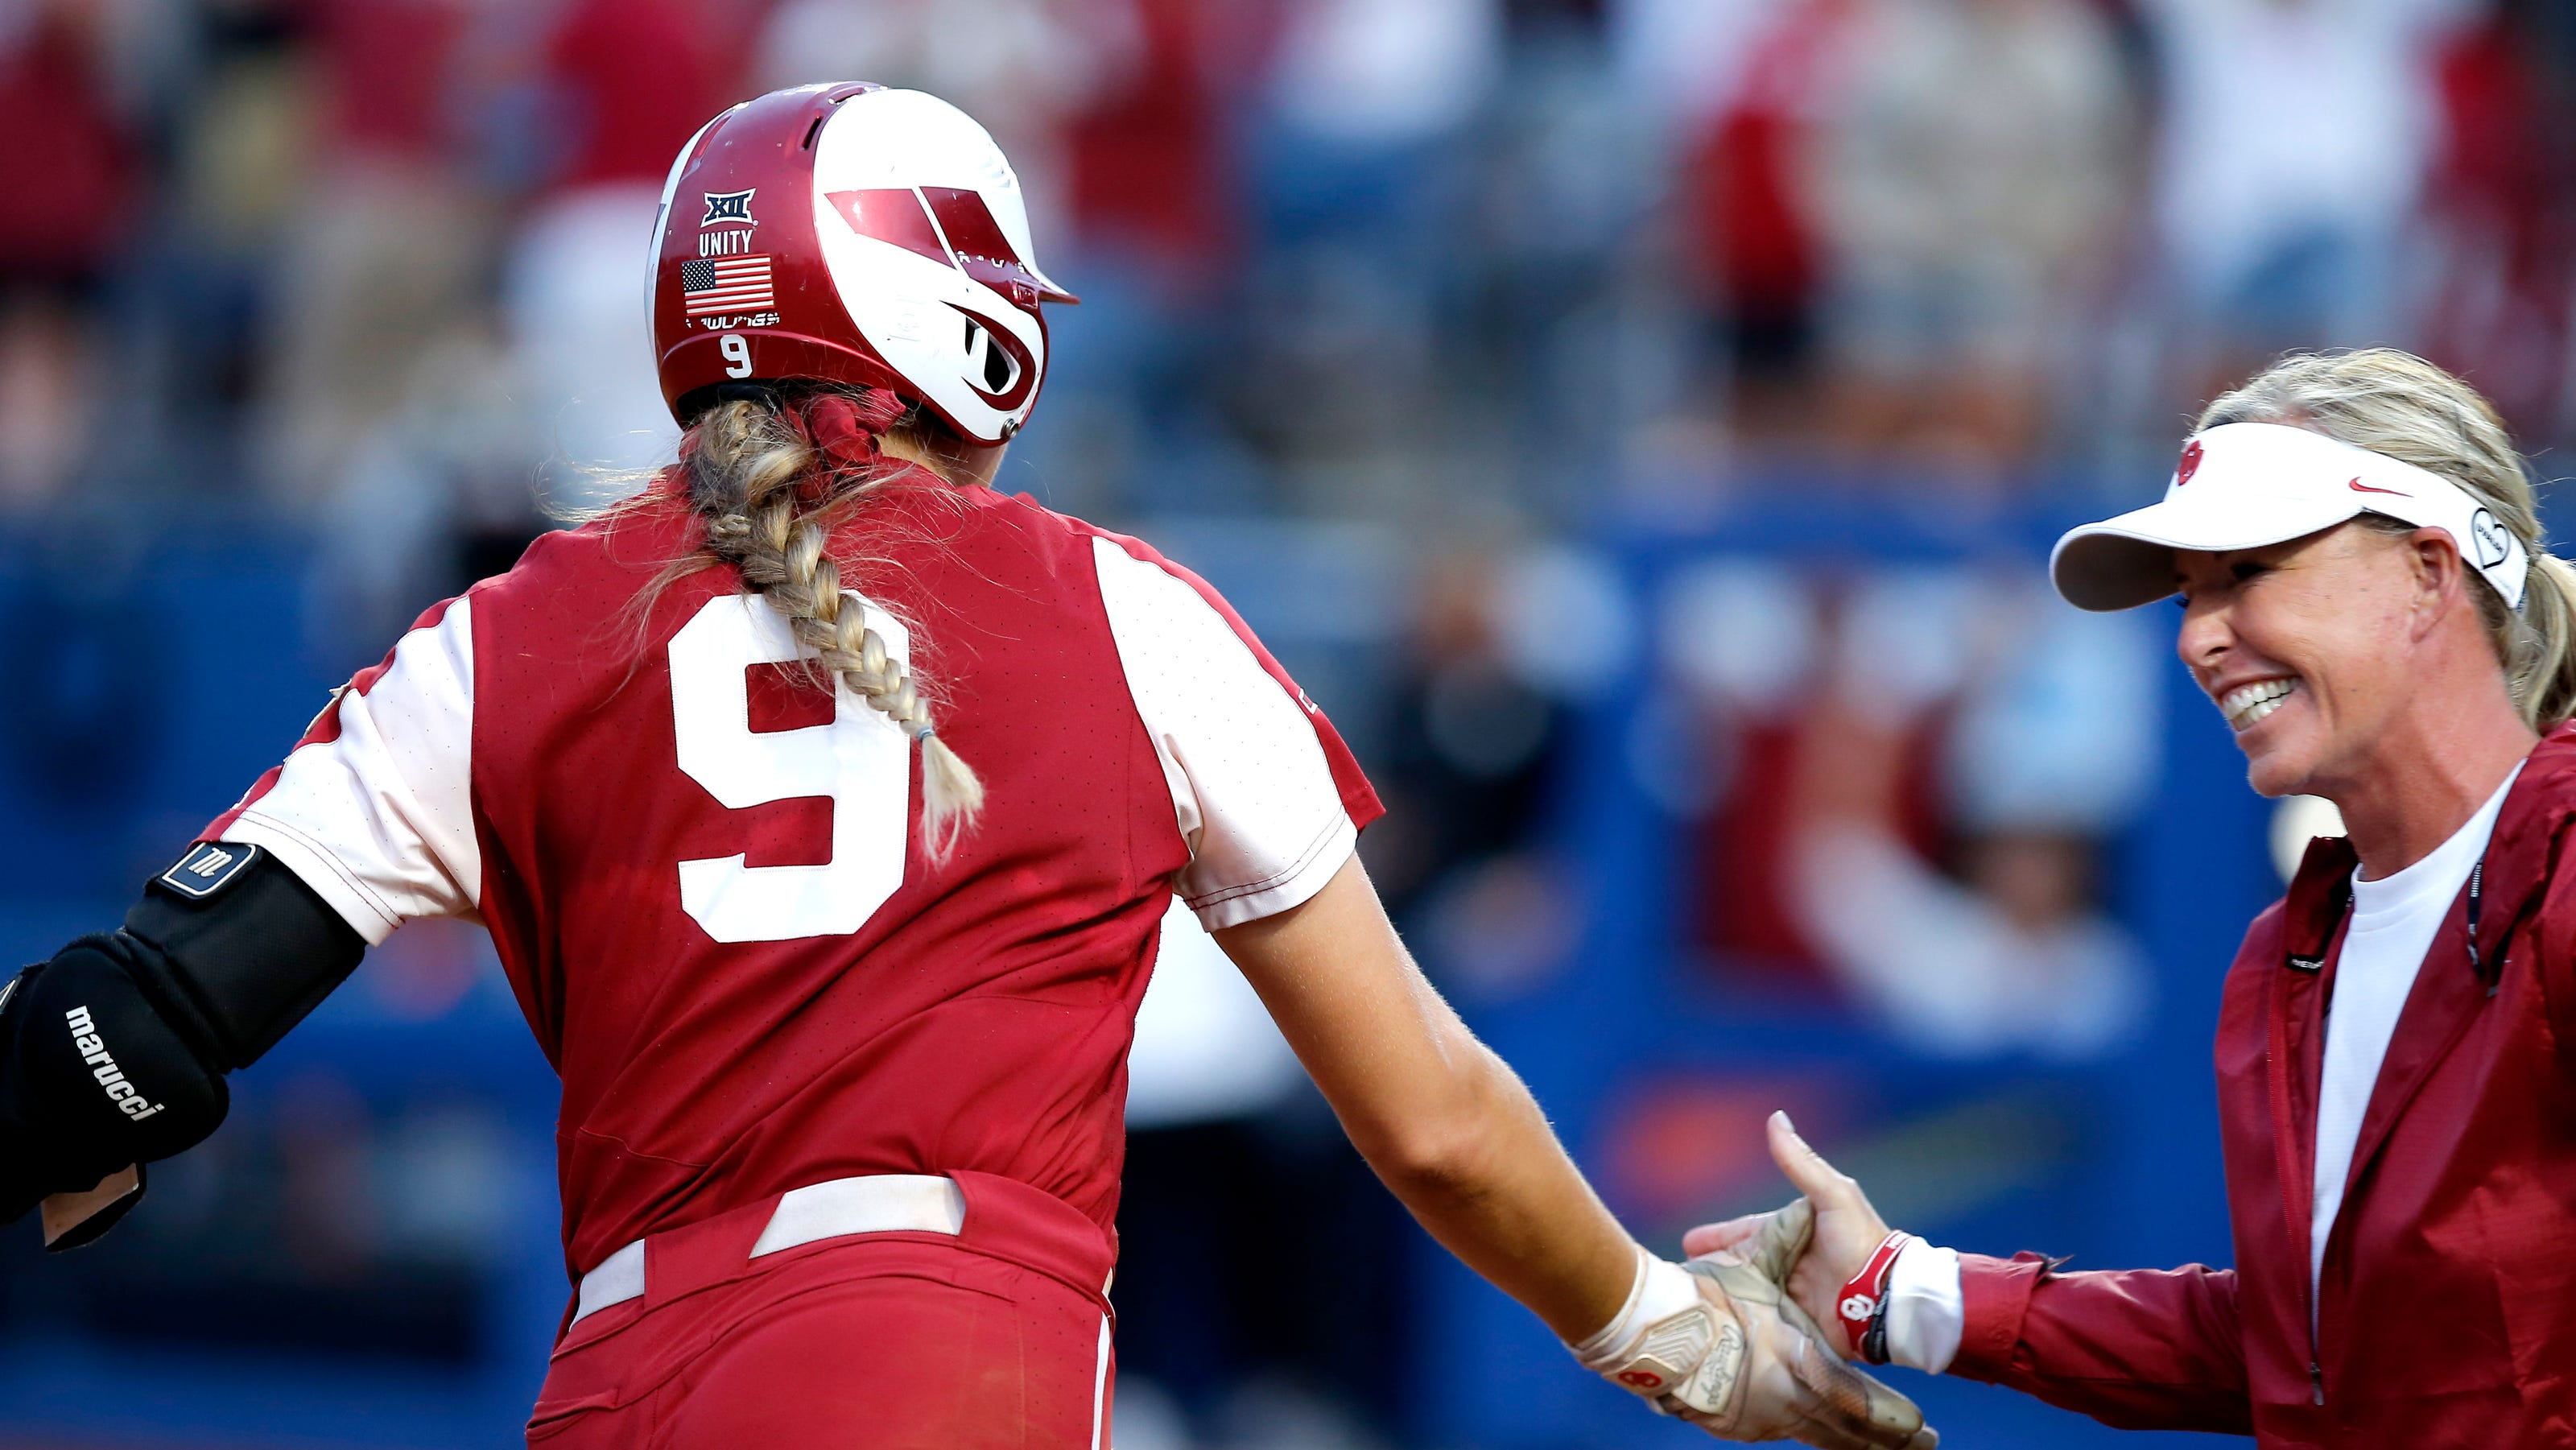 Oklahoma softball 2023 schedule release List of opponents, dates